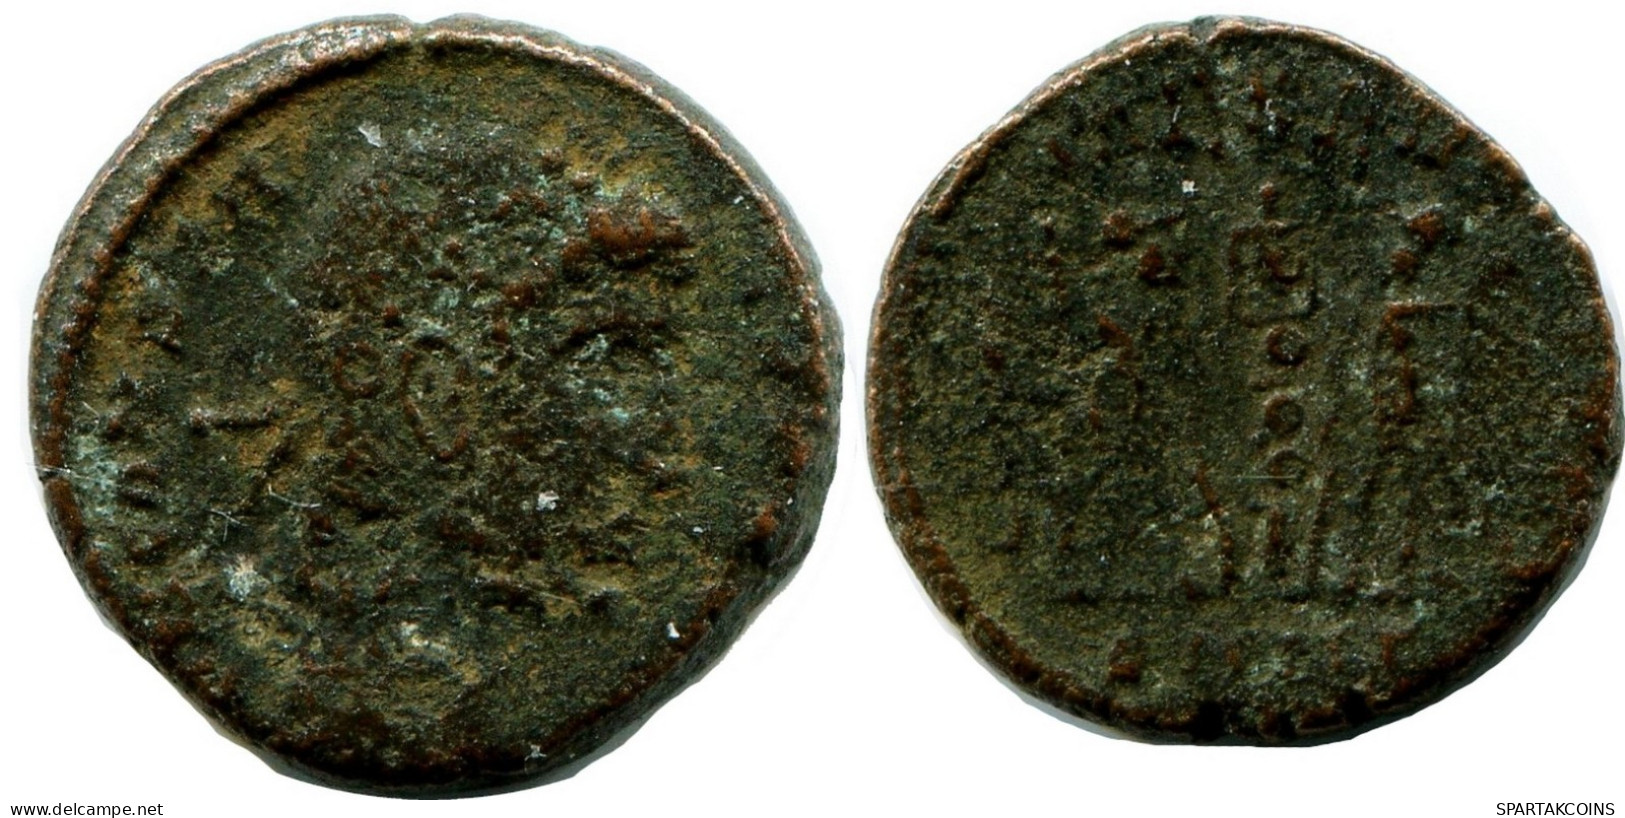 CONSTANS MINTED IN HERACLEA FROM THE ROYAL ONTARIO MUSEUM #ANC11562.14.U.A - The Christian Empire (307 AD Tot 363 AD)